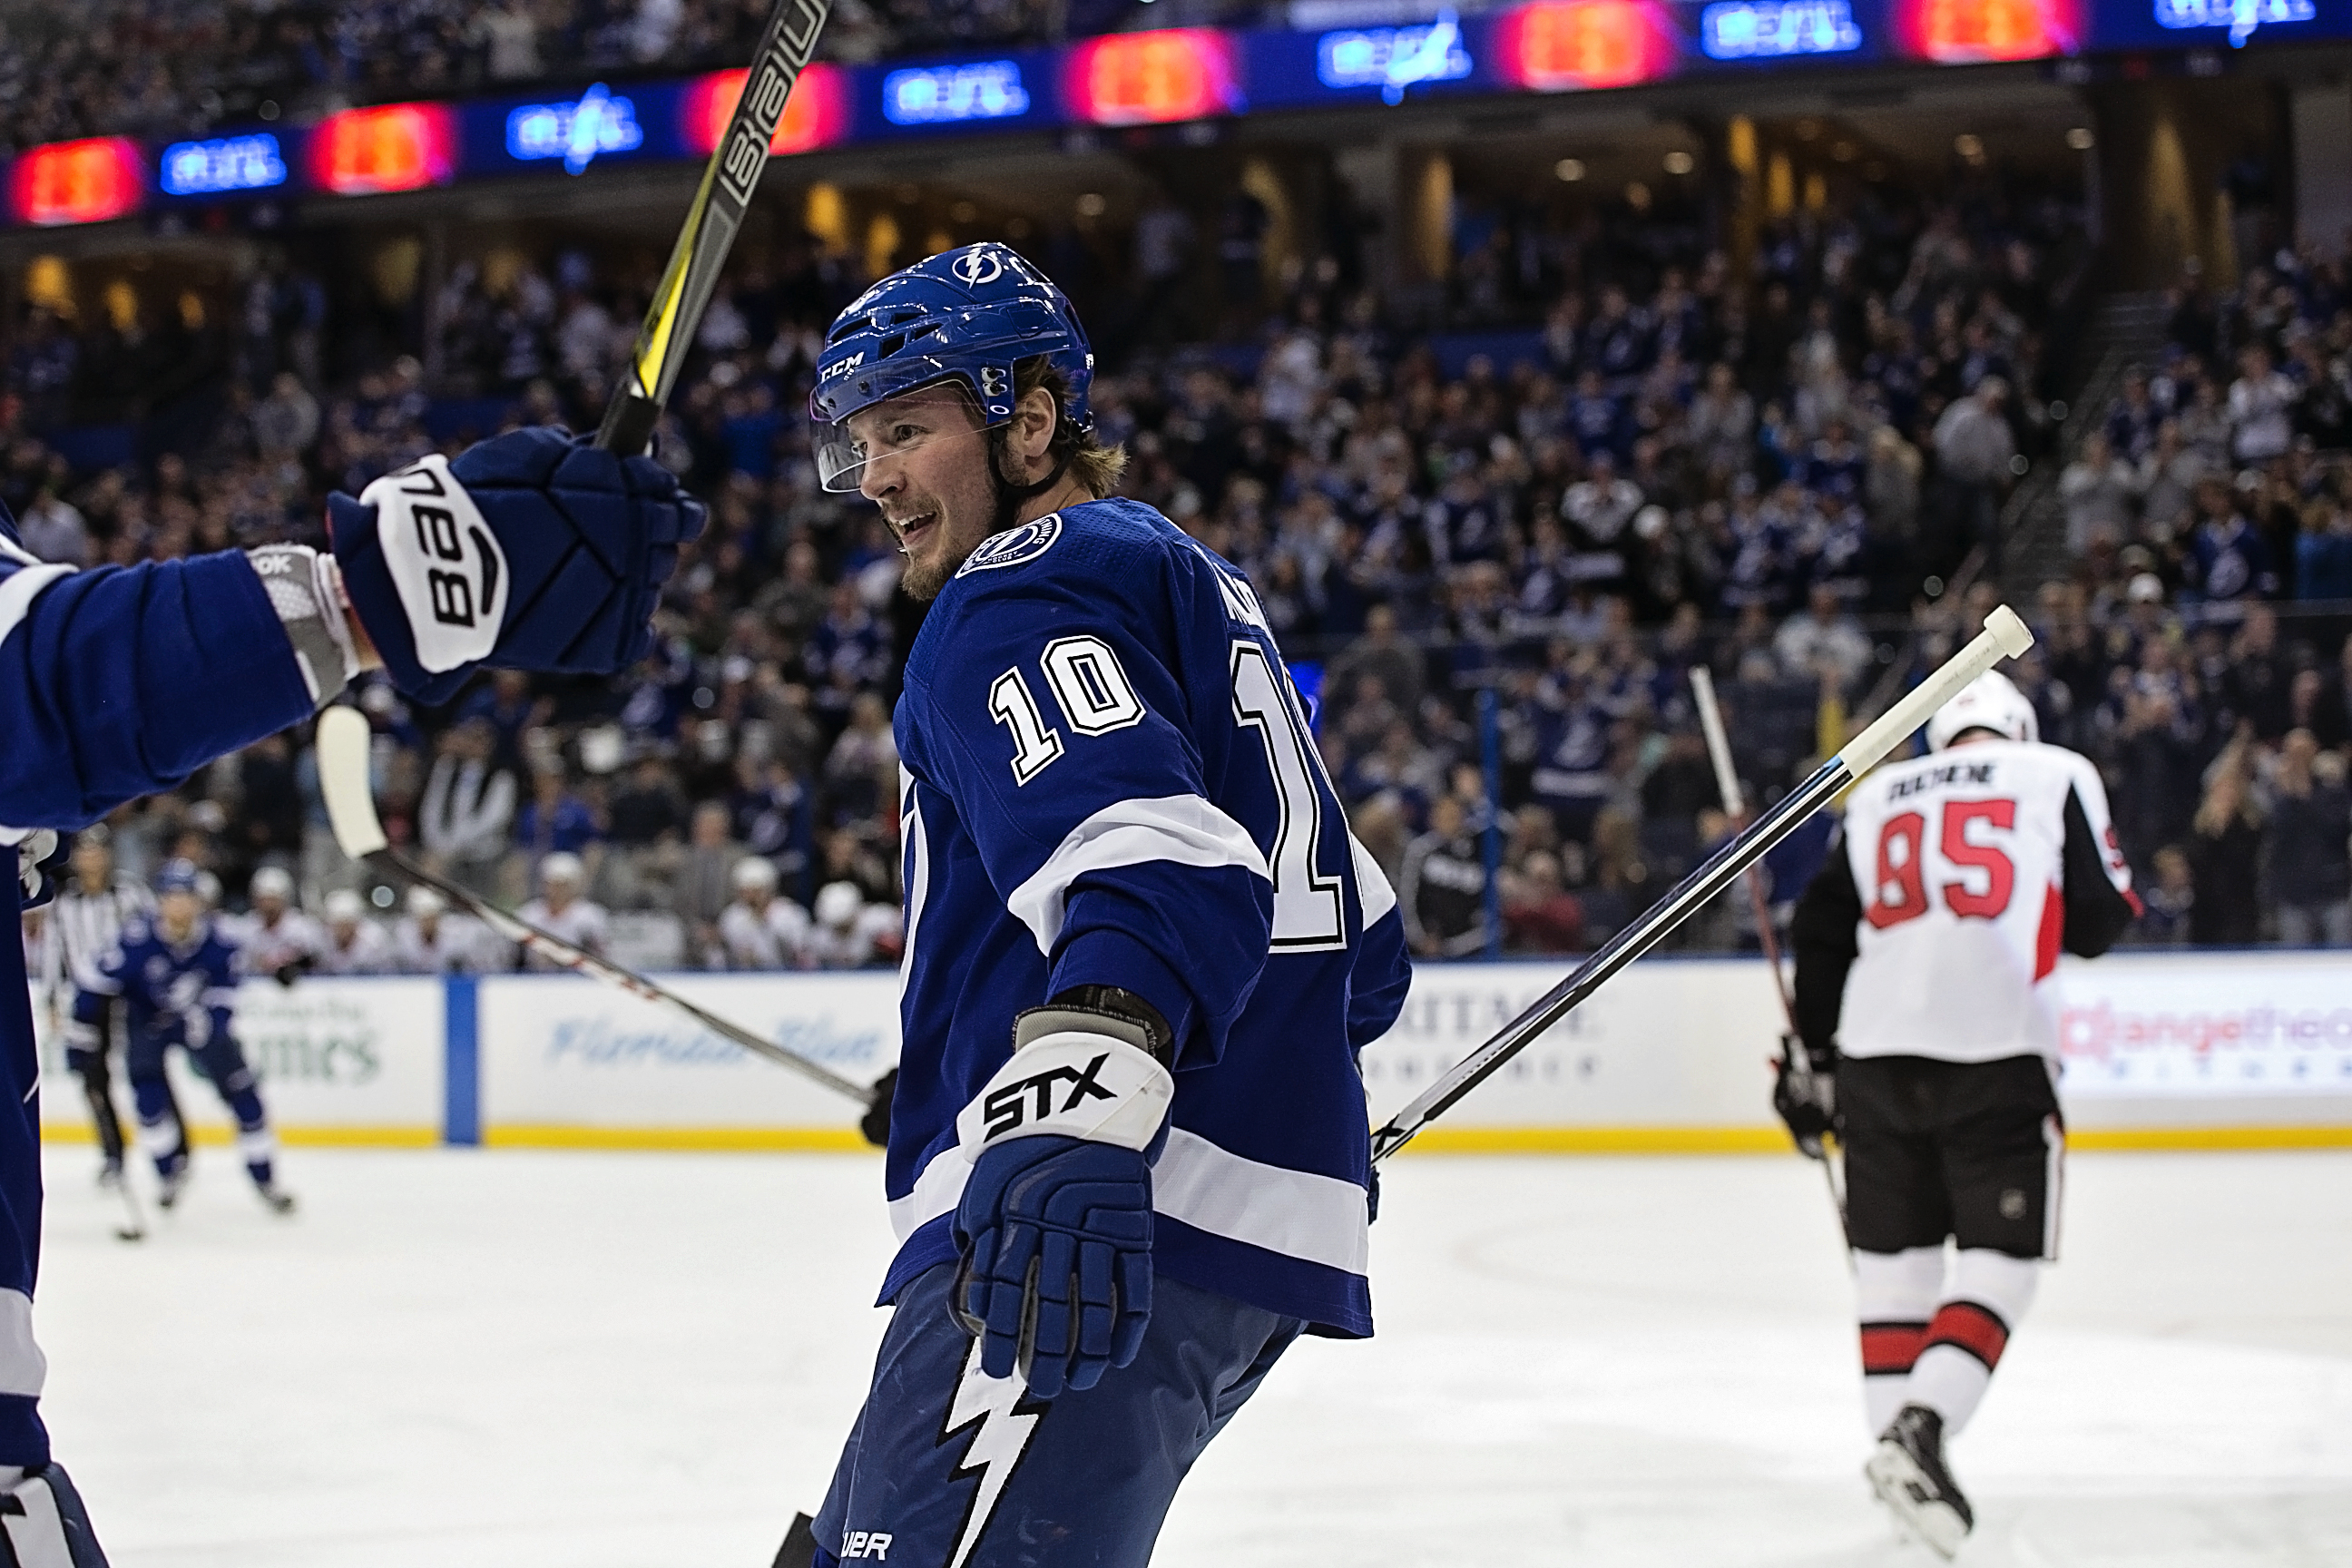 Miller scored three times for Bolts, who lost by three./CARMEN MANDATO